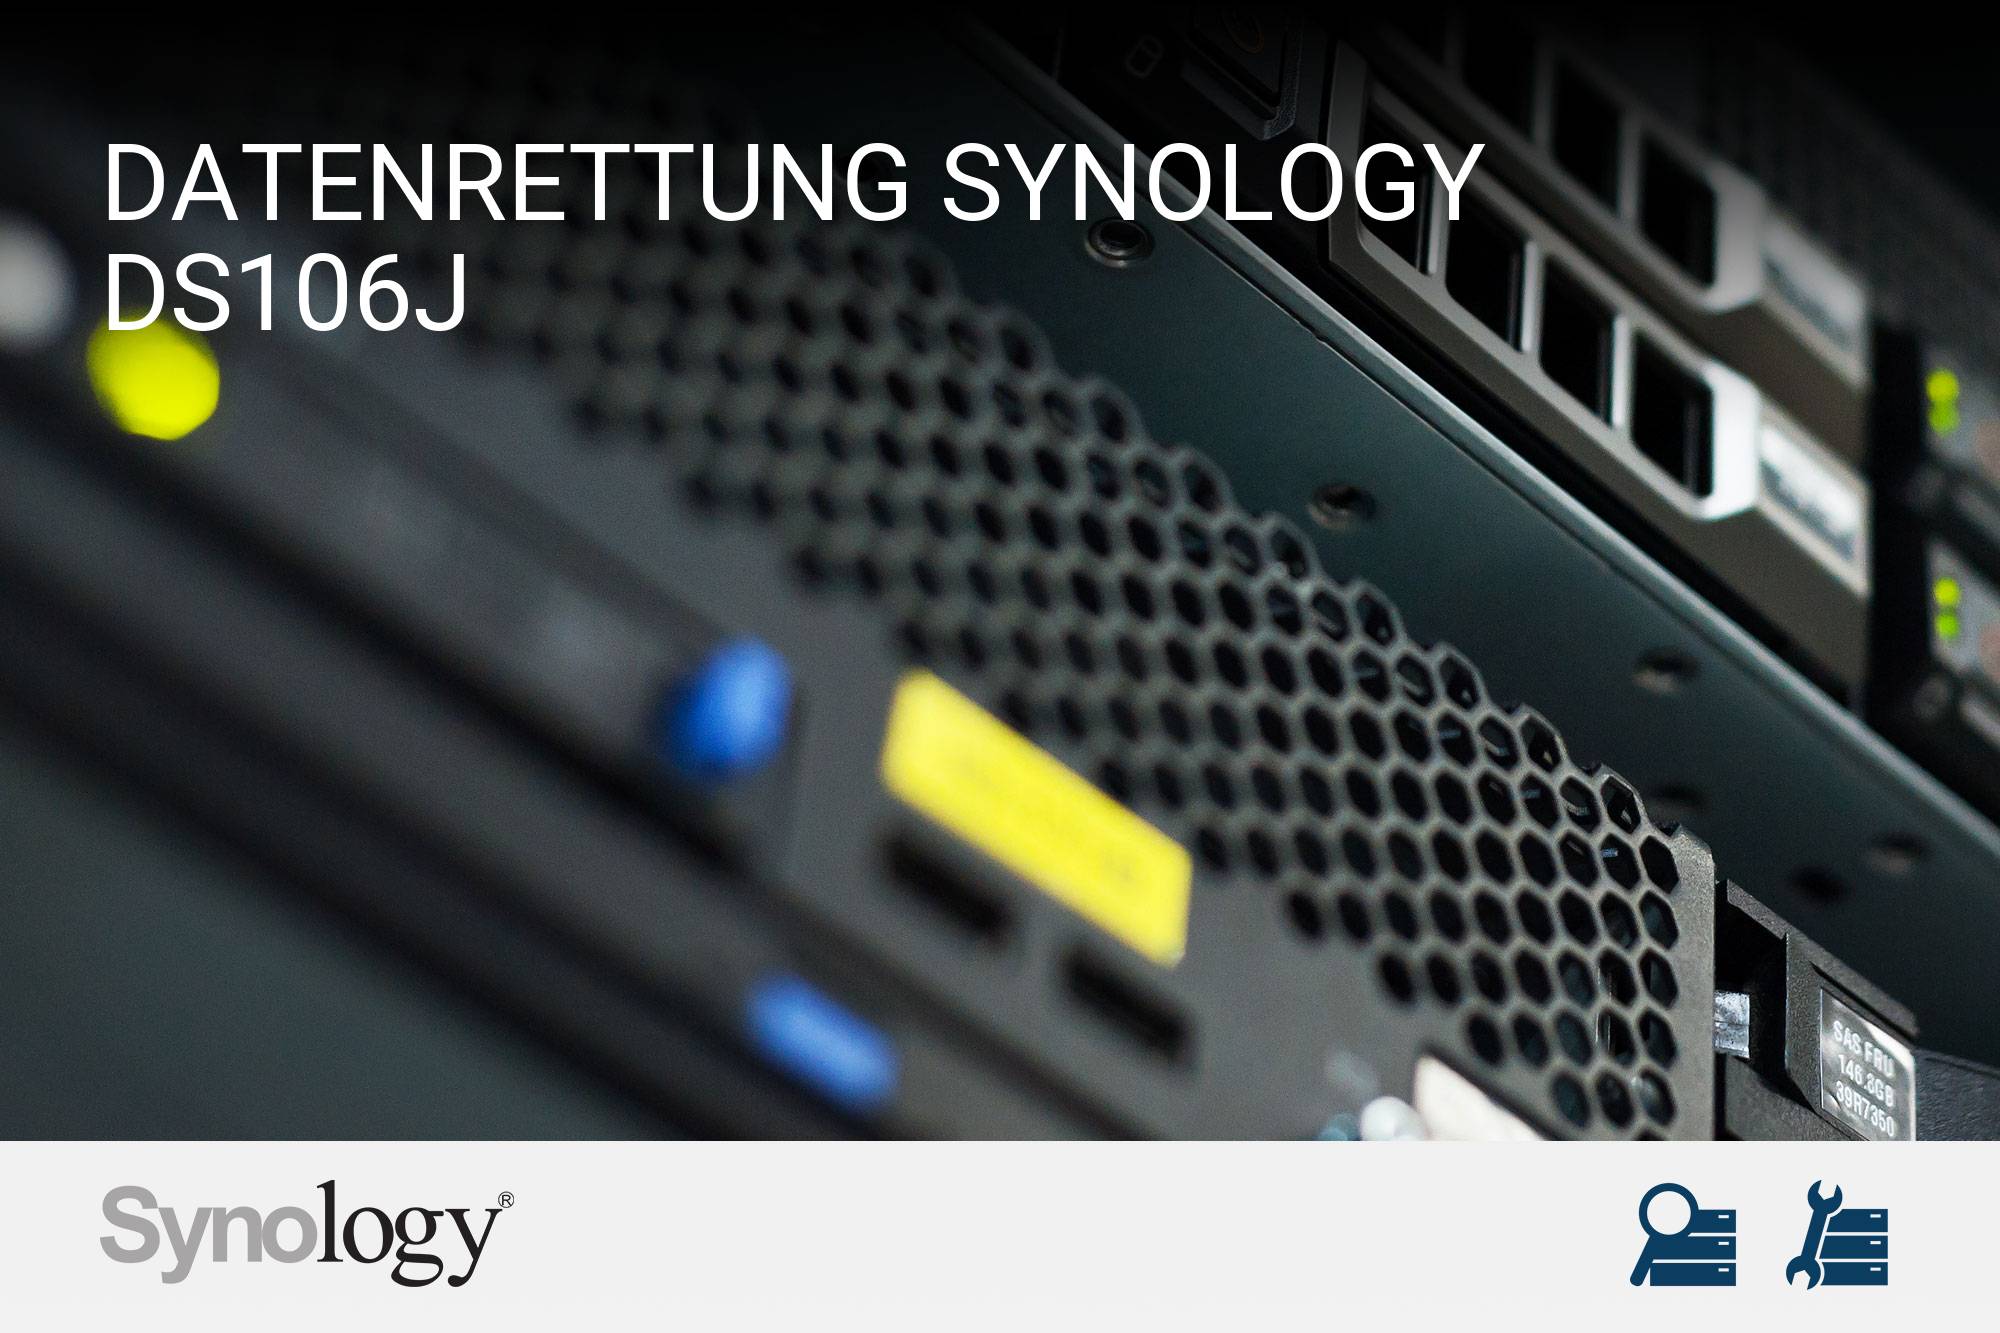 Synology DS106j